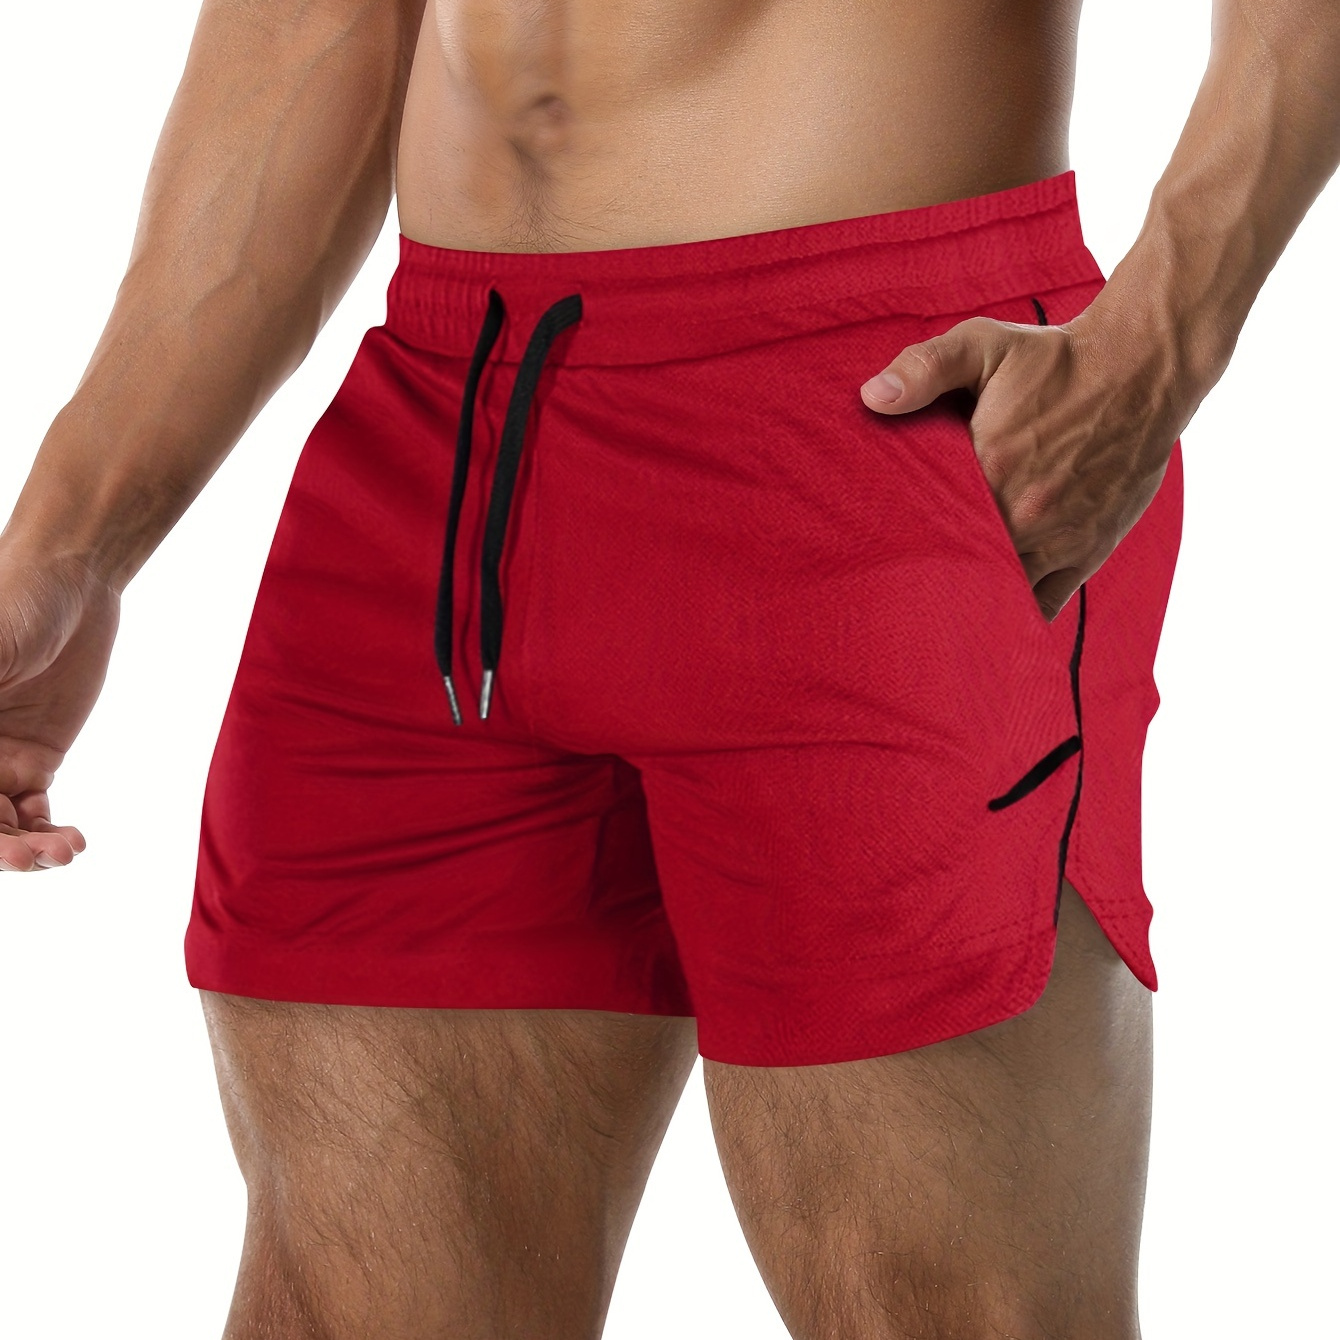 

Quick Drying Comfy Shorts, Men's Casual Zipper Pockets Slightly Stretch Waist Drawstring Shorts For Summer Gym Workout Training